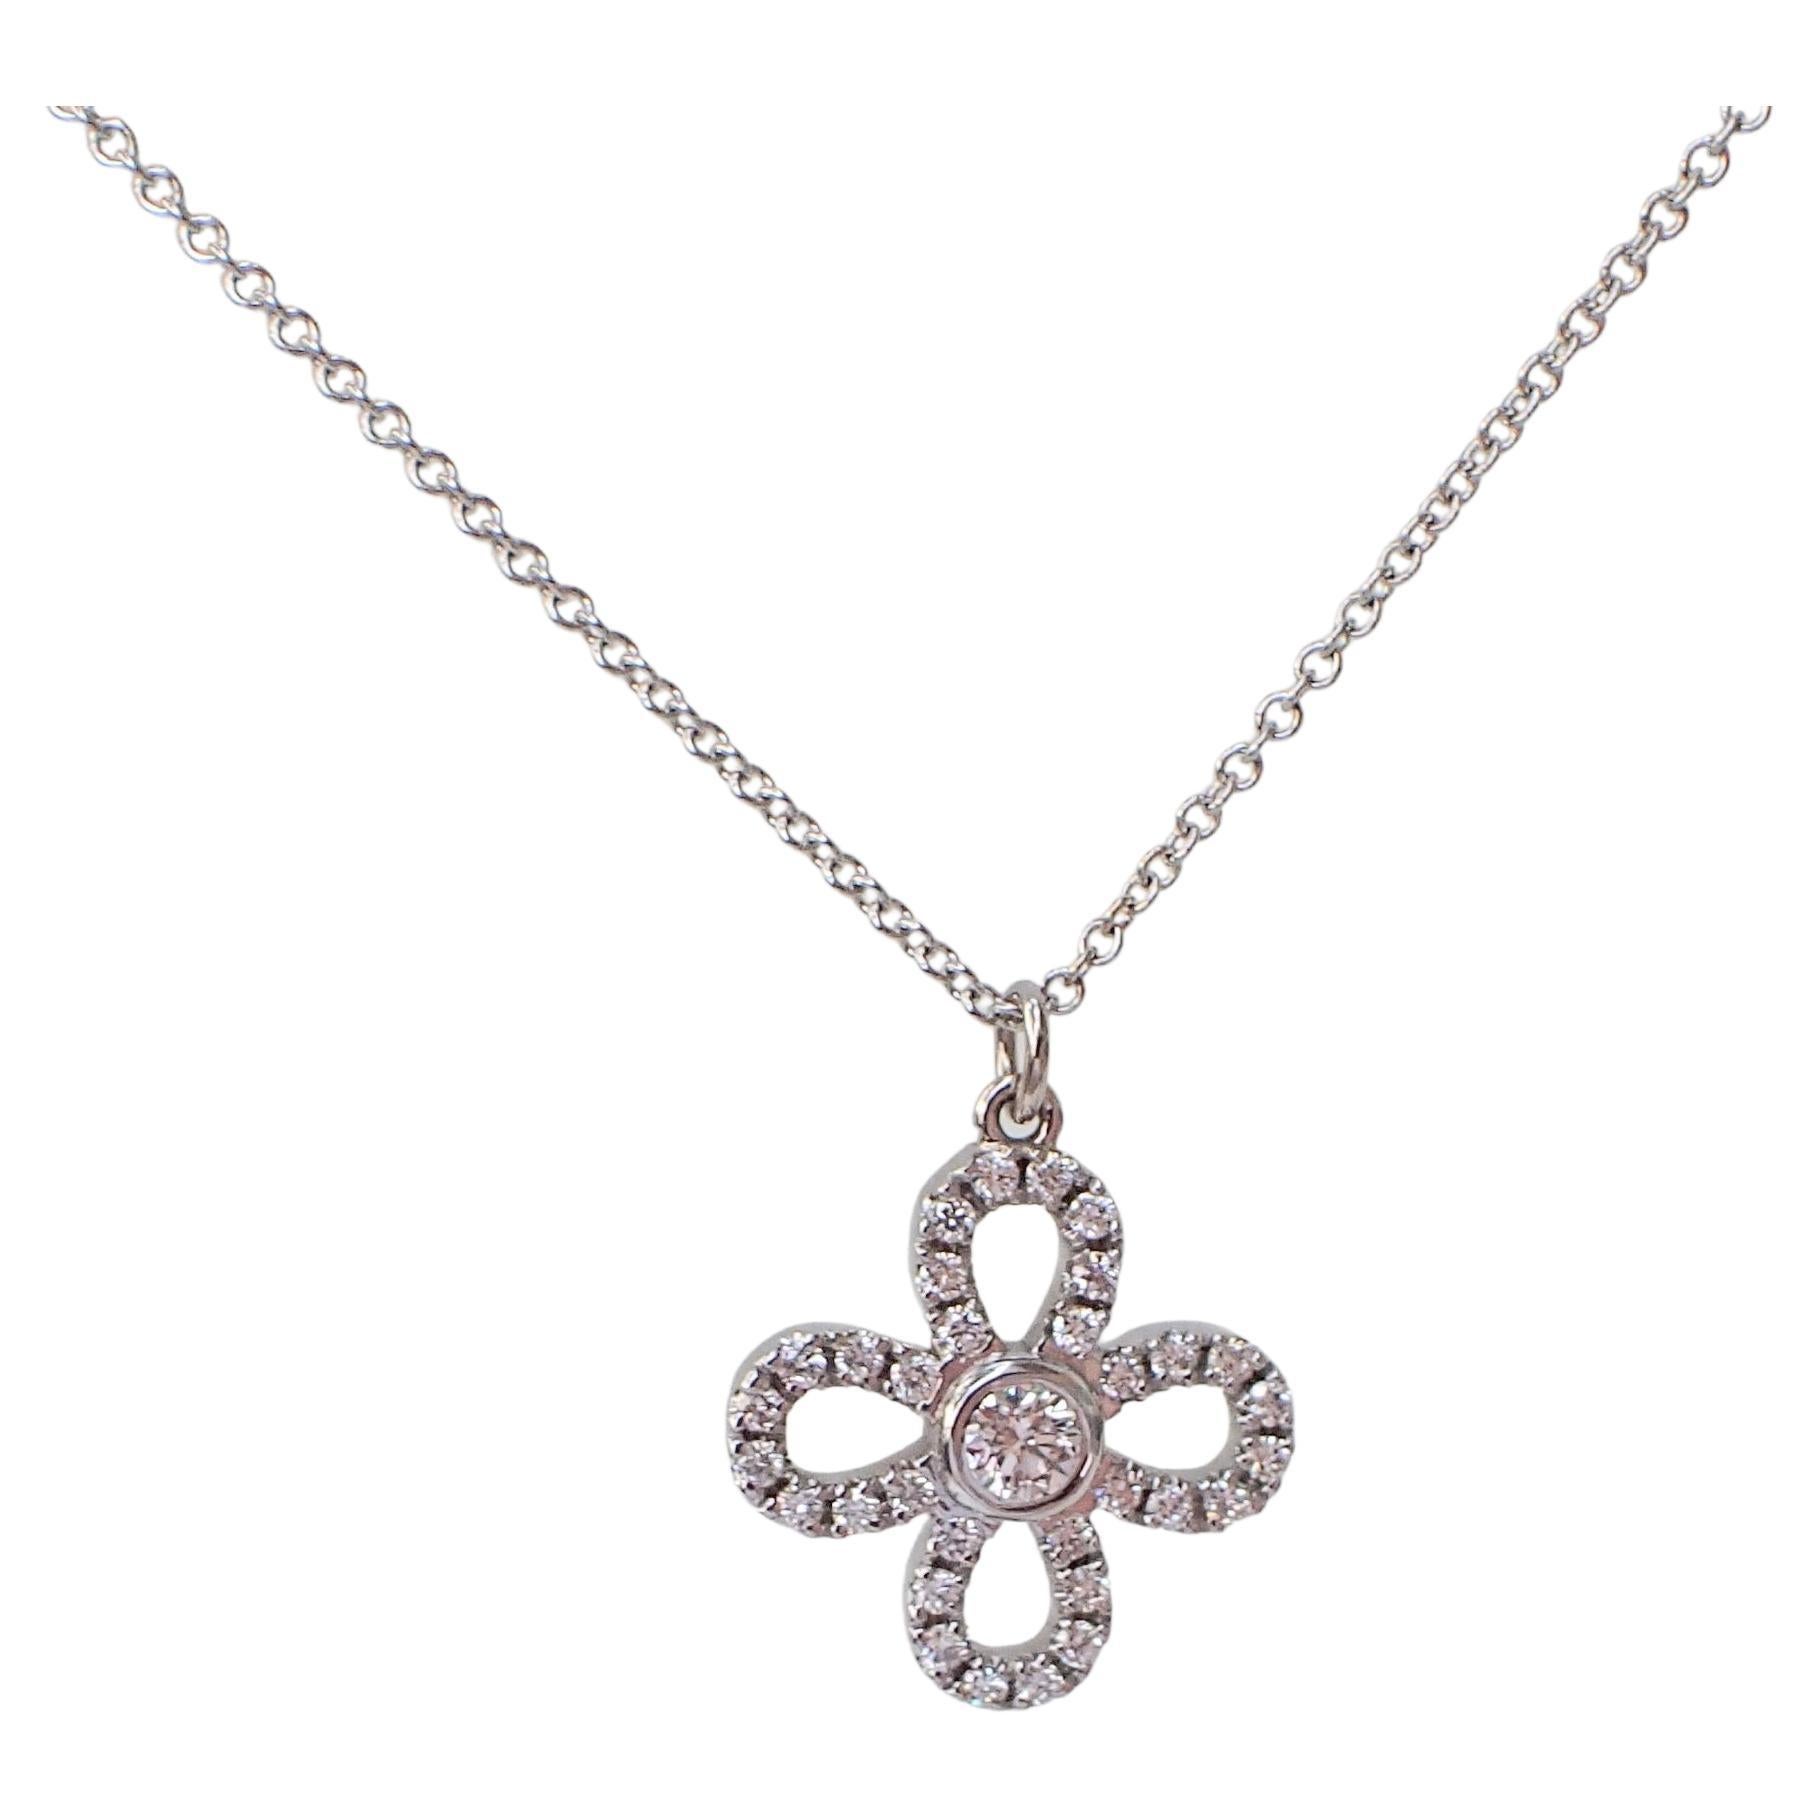 18k White Gold Pendant with 0.46 Carats of Diamond Hangs from Cable Chain For Sale